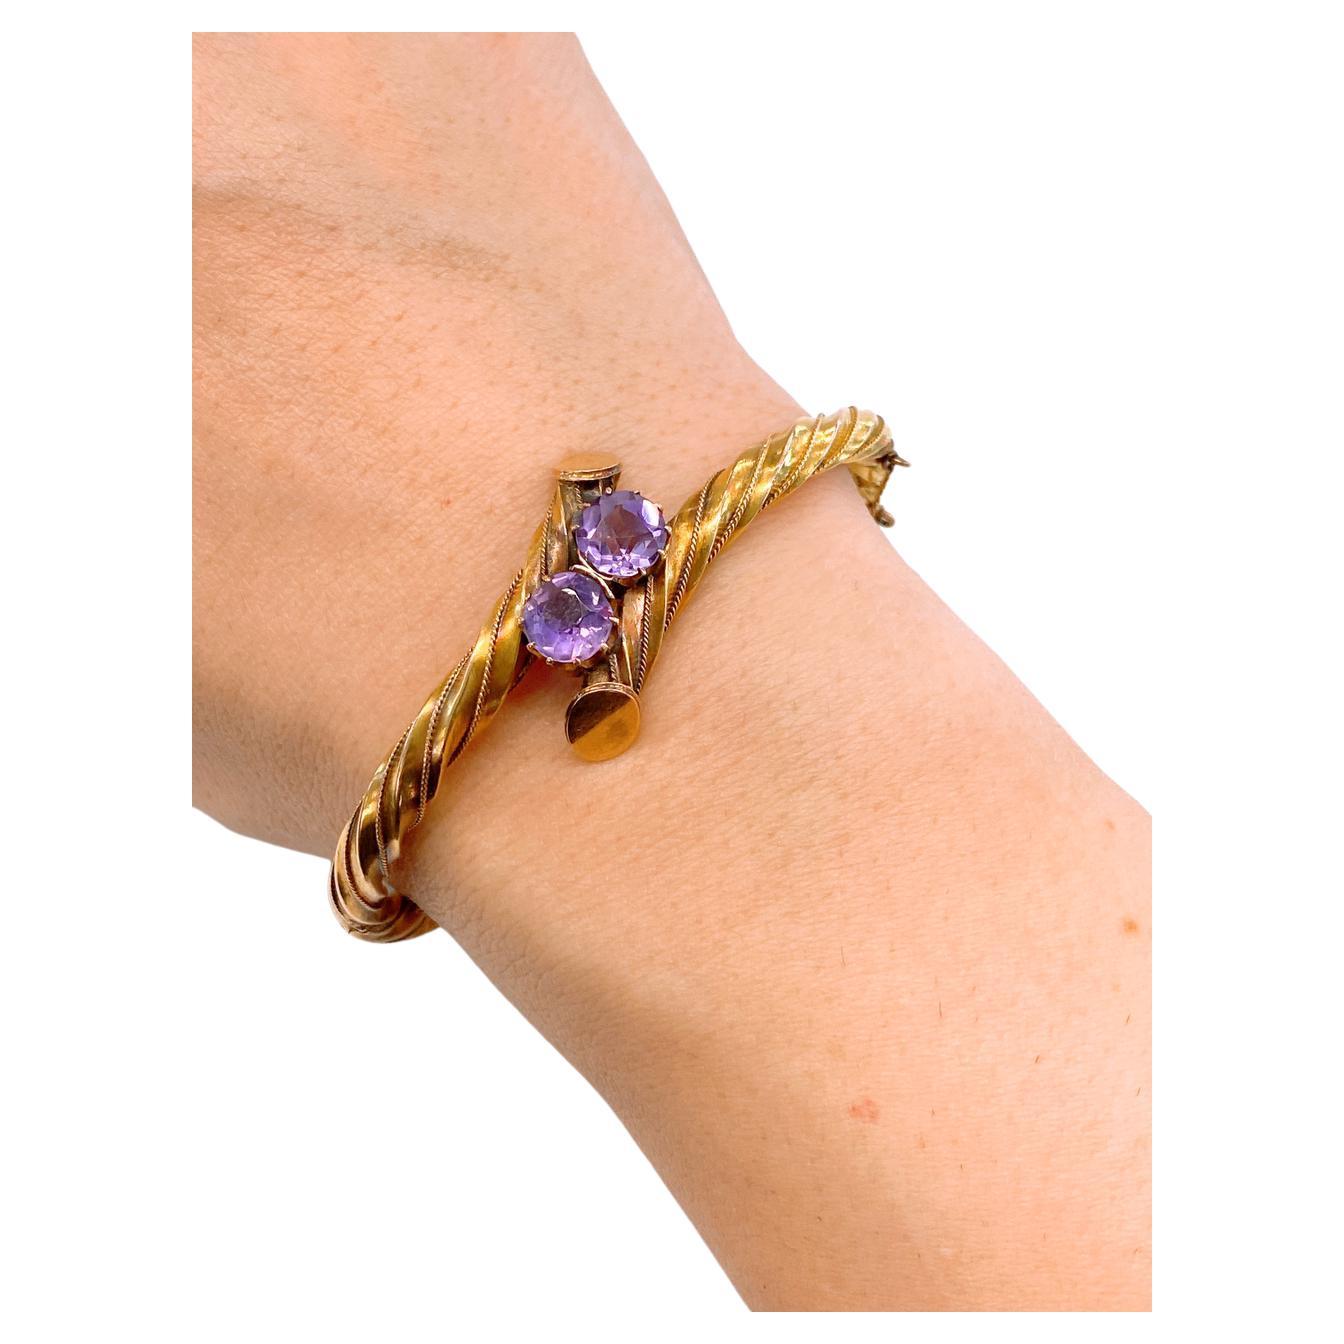 Antique Russian amethyst cuff bracelet centered with 2 round cut amethyst with magnificent detaled workmanship on the cuff bracelet with total gold weight of 15 grams hall marked 56 imperial Russian gold standard and st Petersburg assay mark and